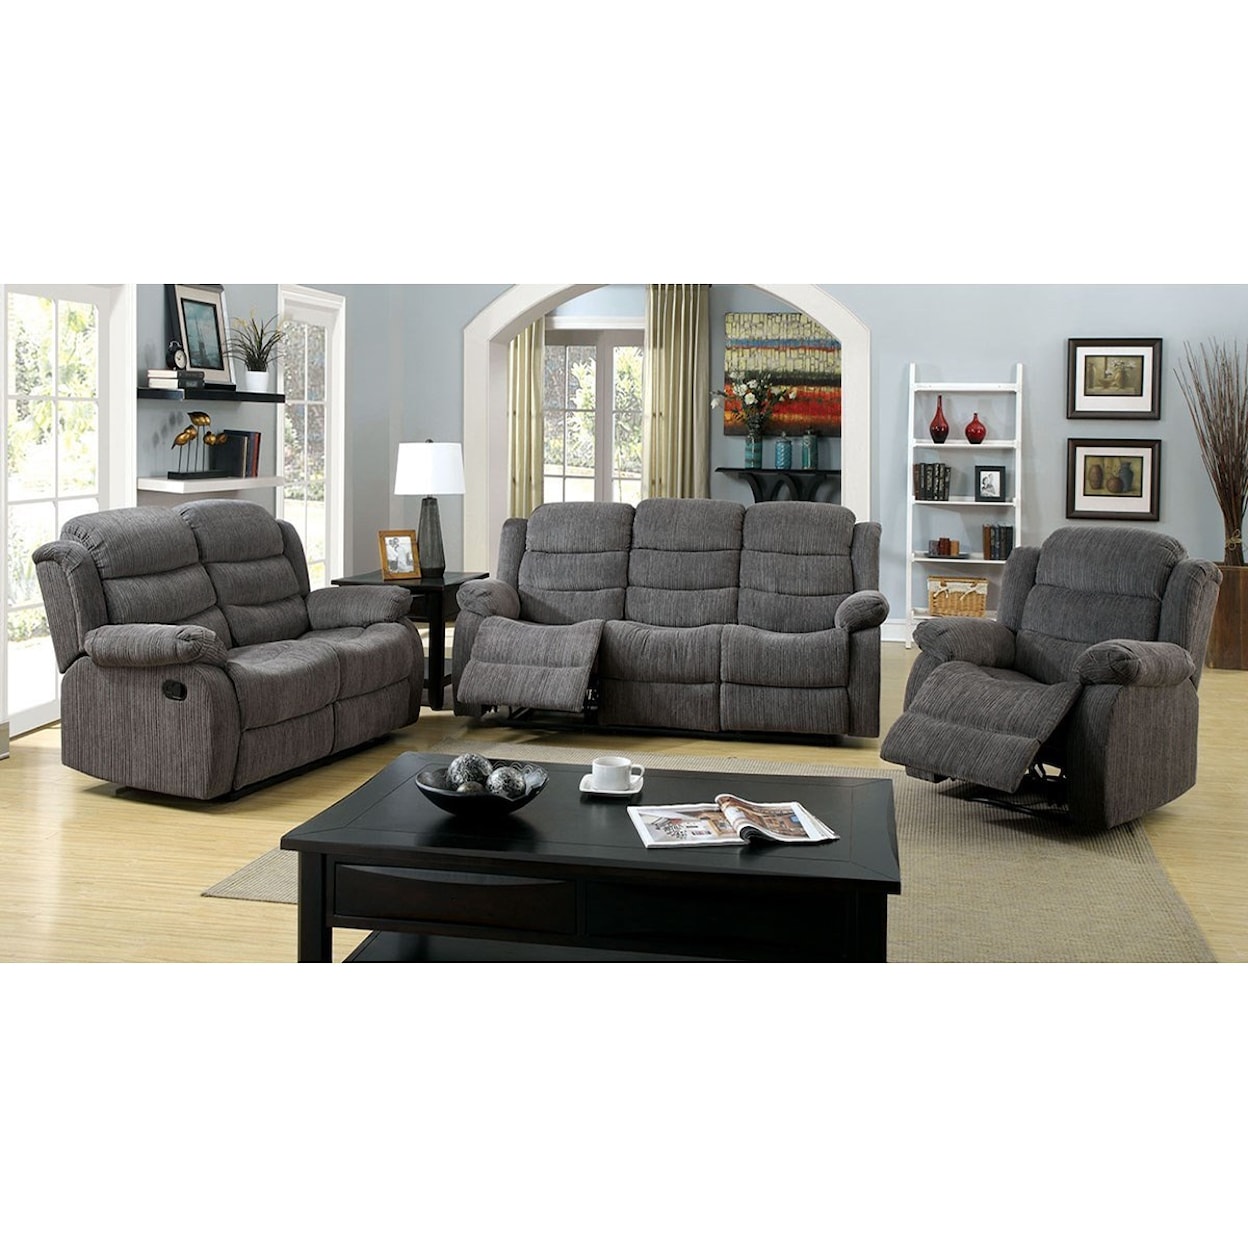 Furniture of America Millville Reclining Living Room Group